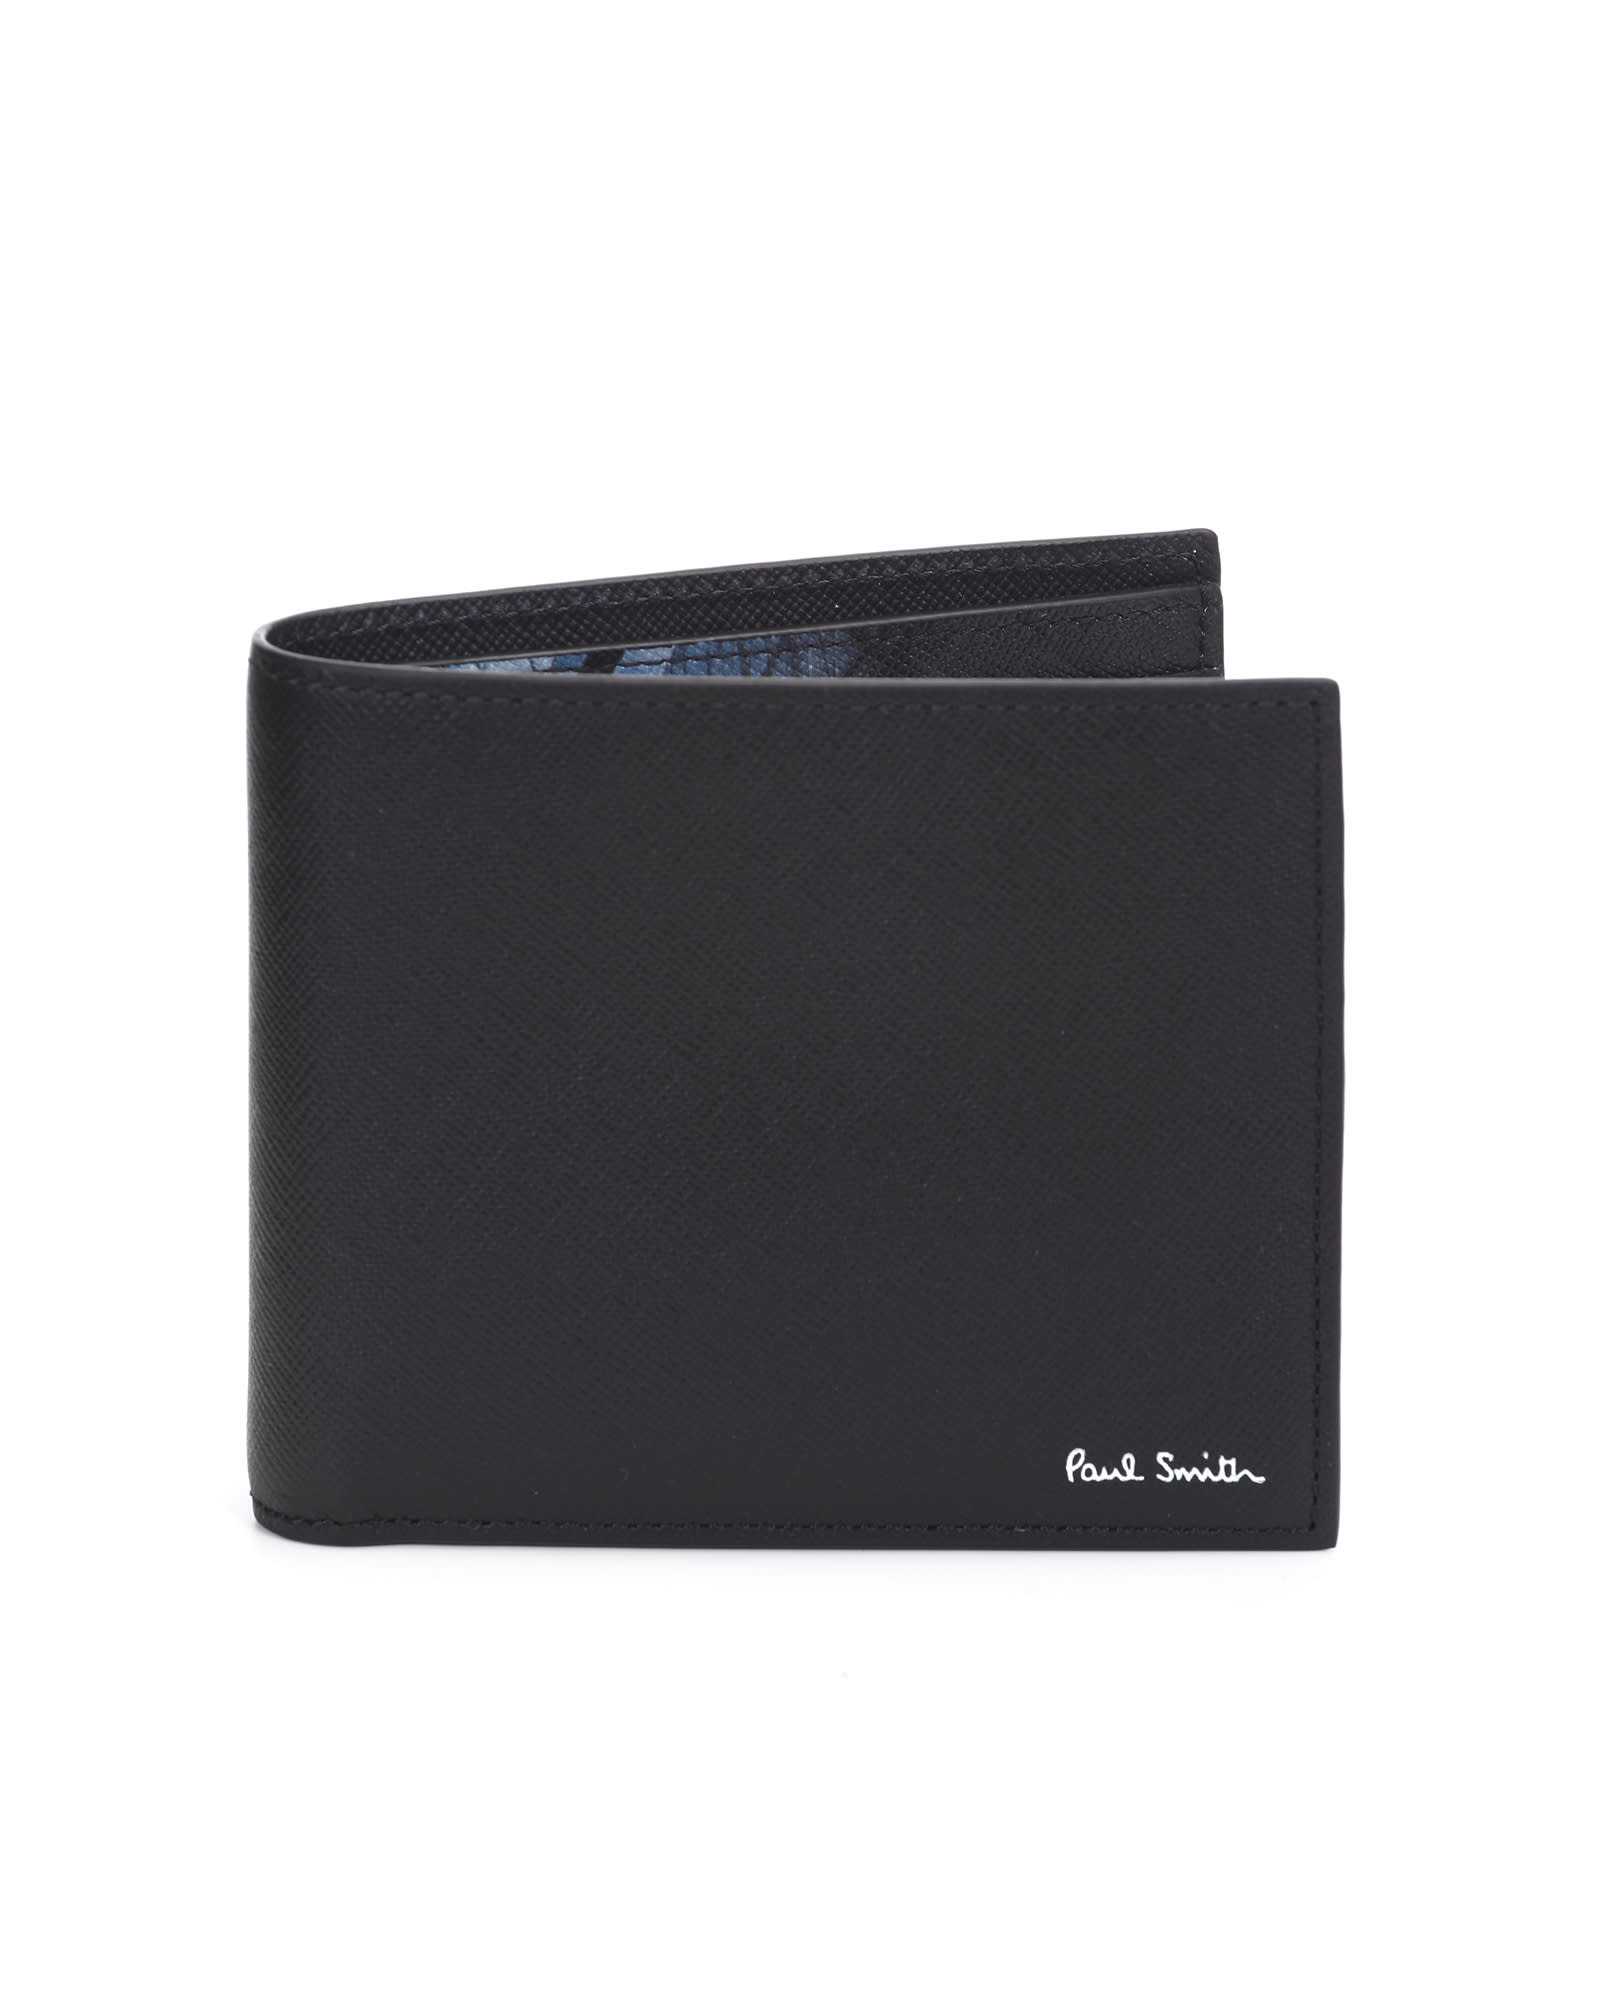 Paul Smith black leather book wallet